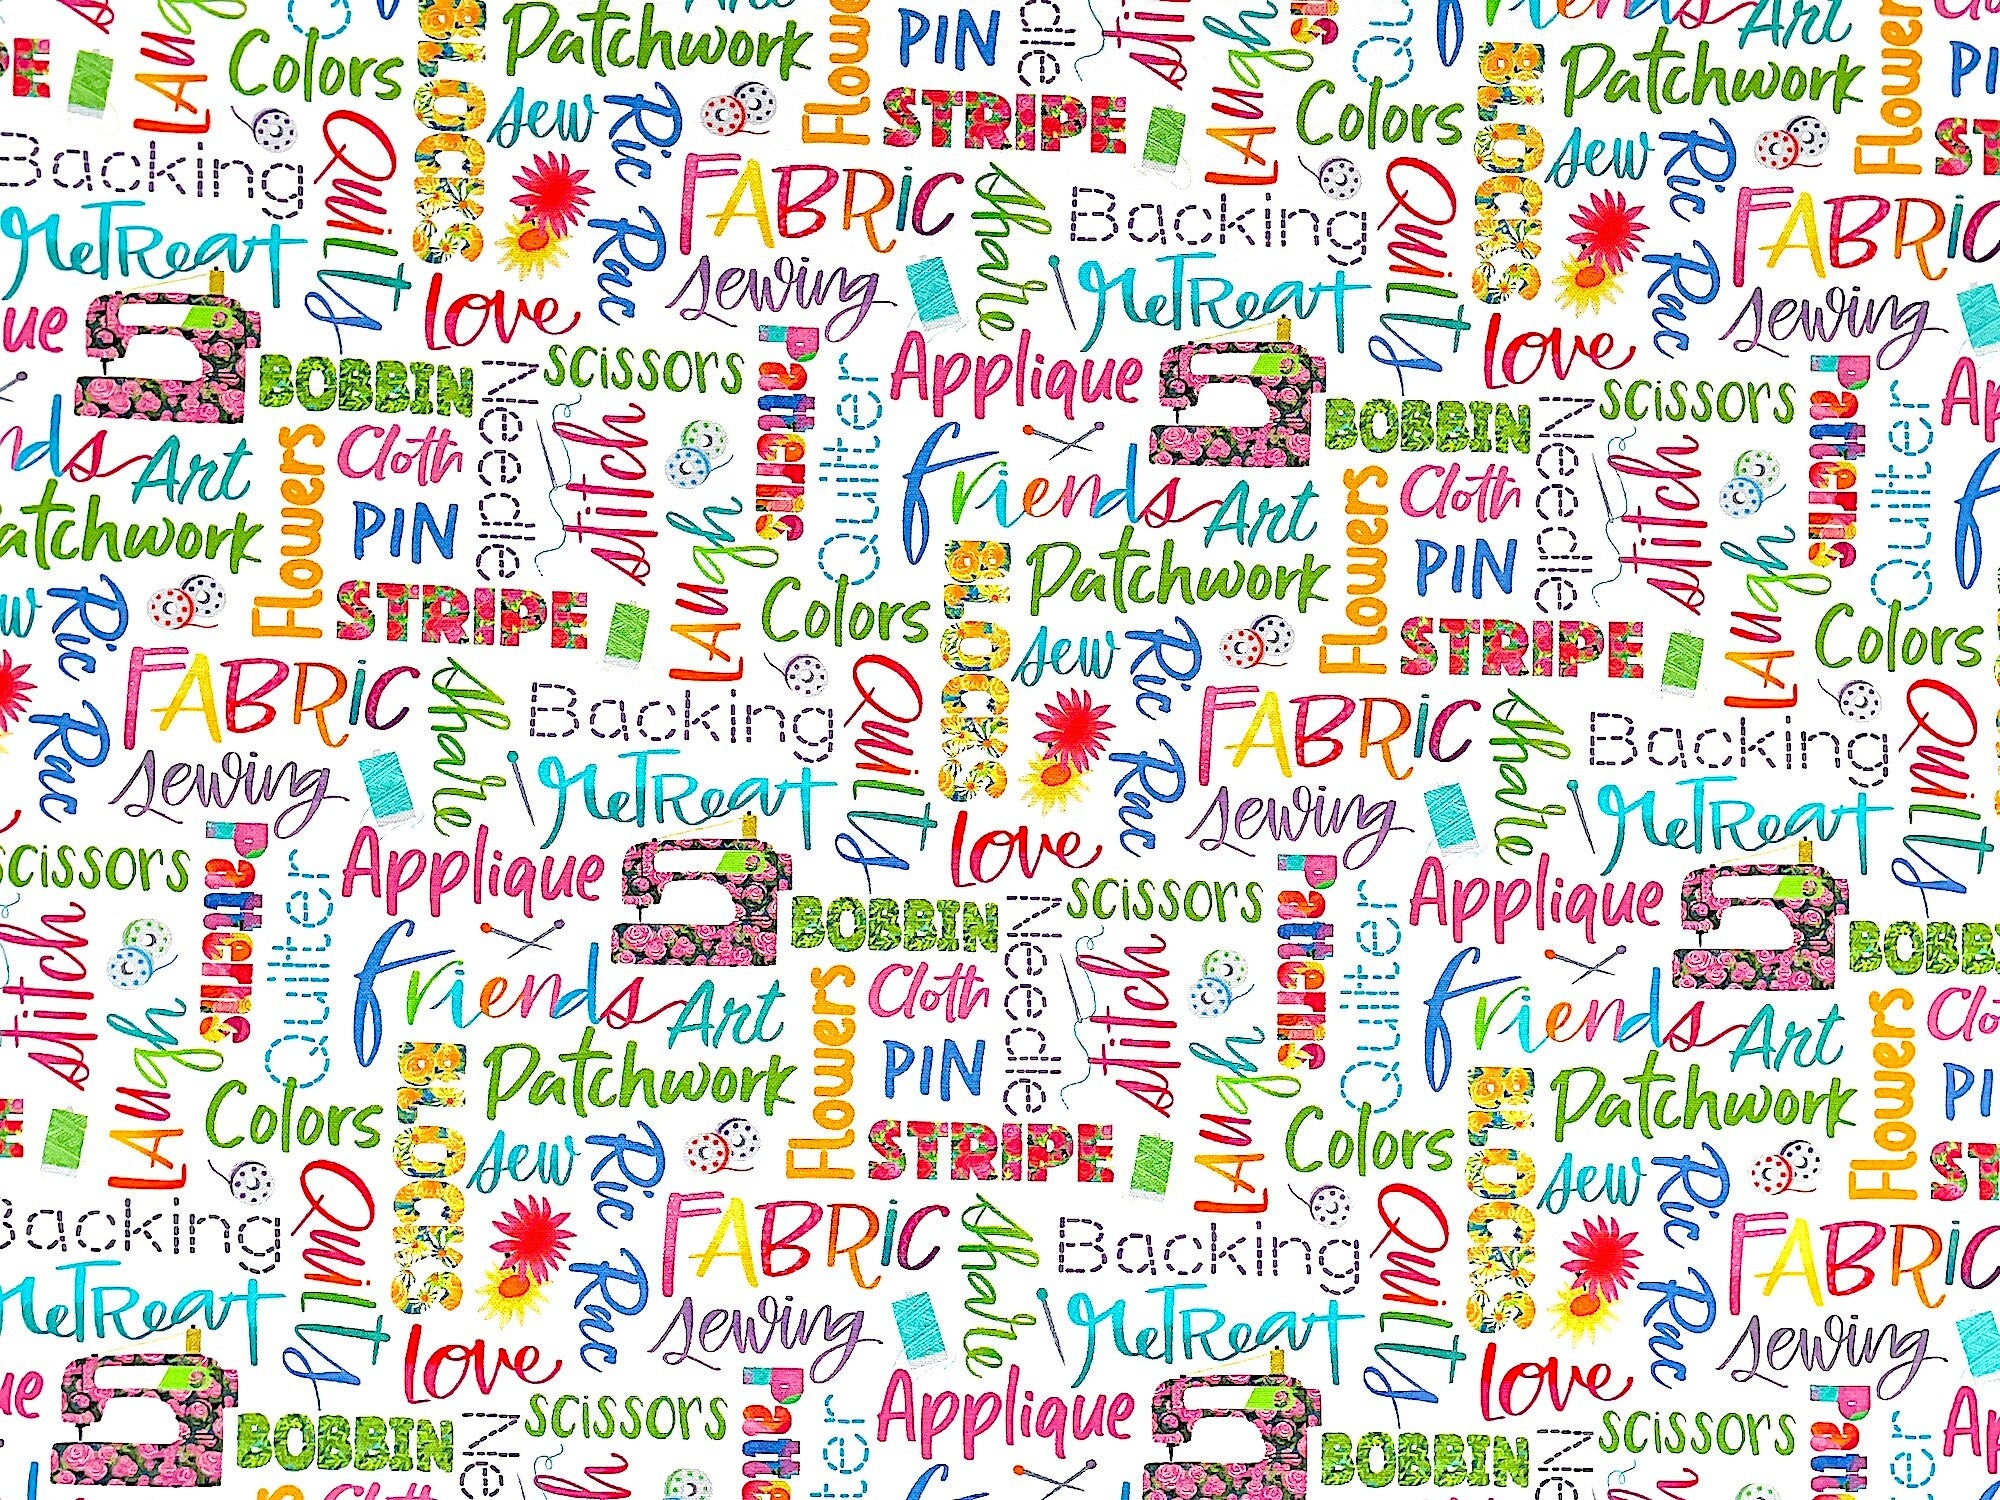 White cotton fabric covered with sewing and quilt sayings such as bobbin, applique, scissors, pink stripe and more.